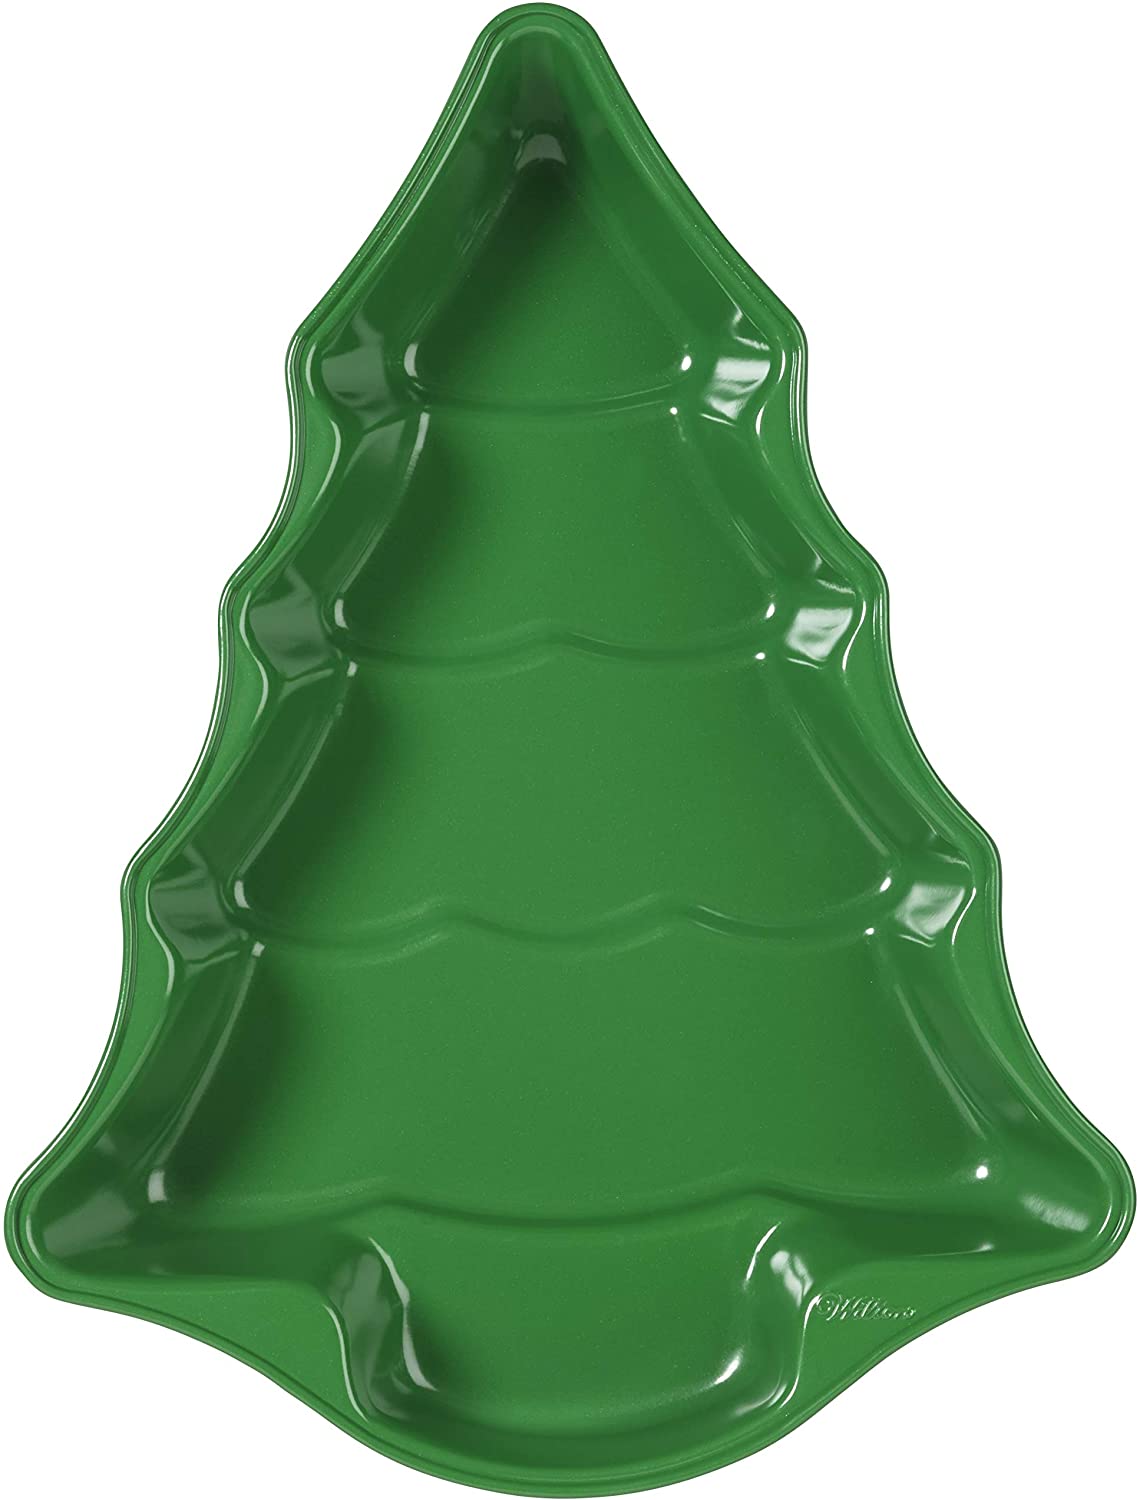 Wilton Novelty Cake Pan Tree Other 13.75 Inch 39 x 26 x 2, Multi-Colour